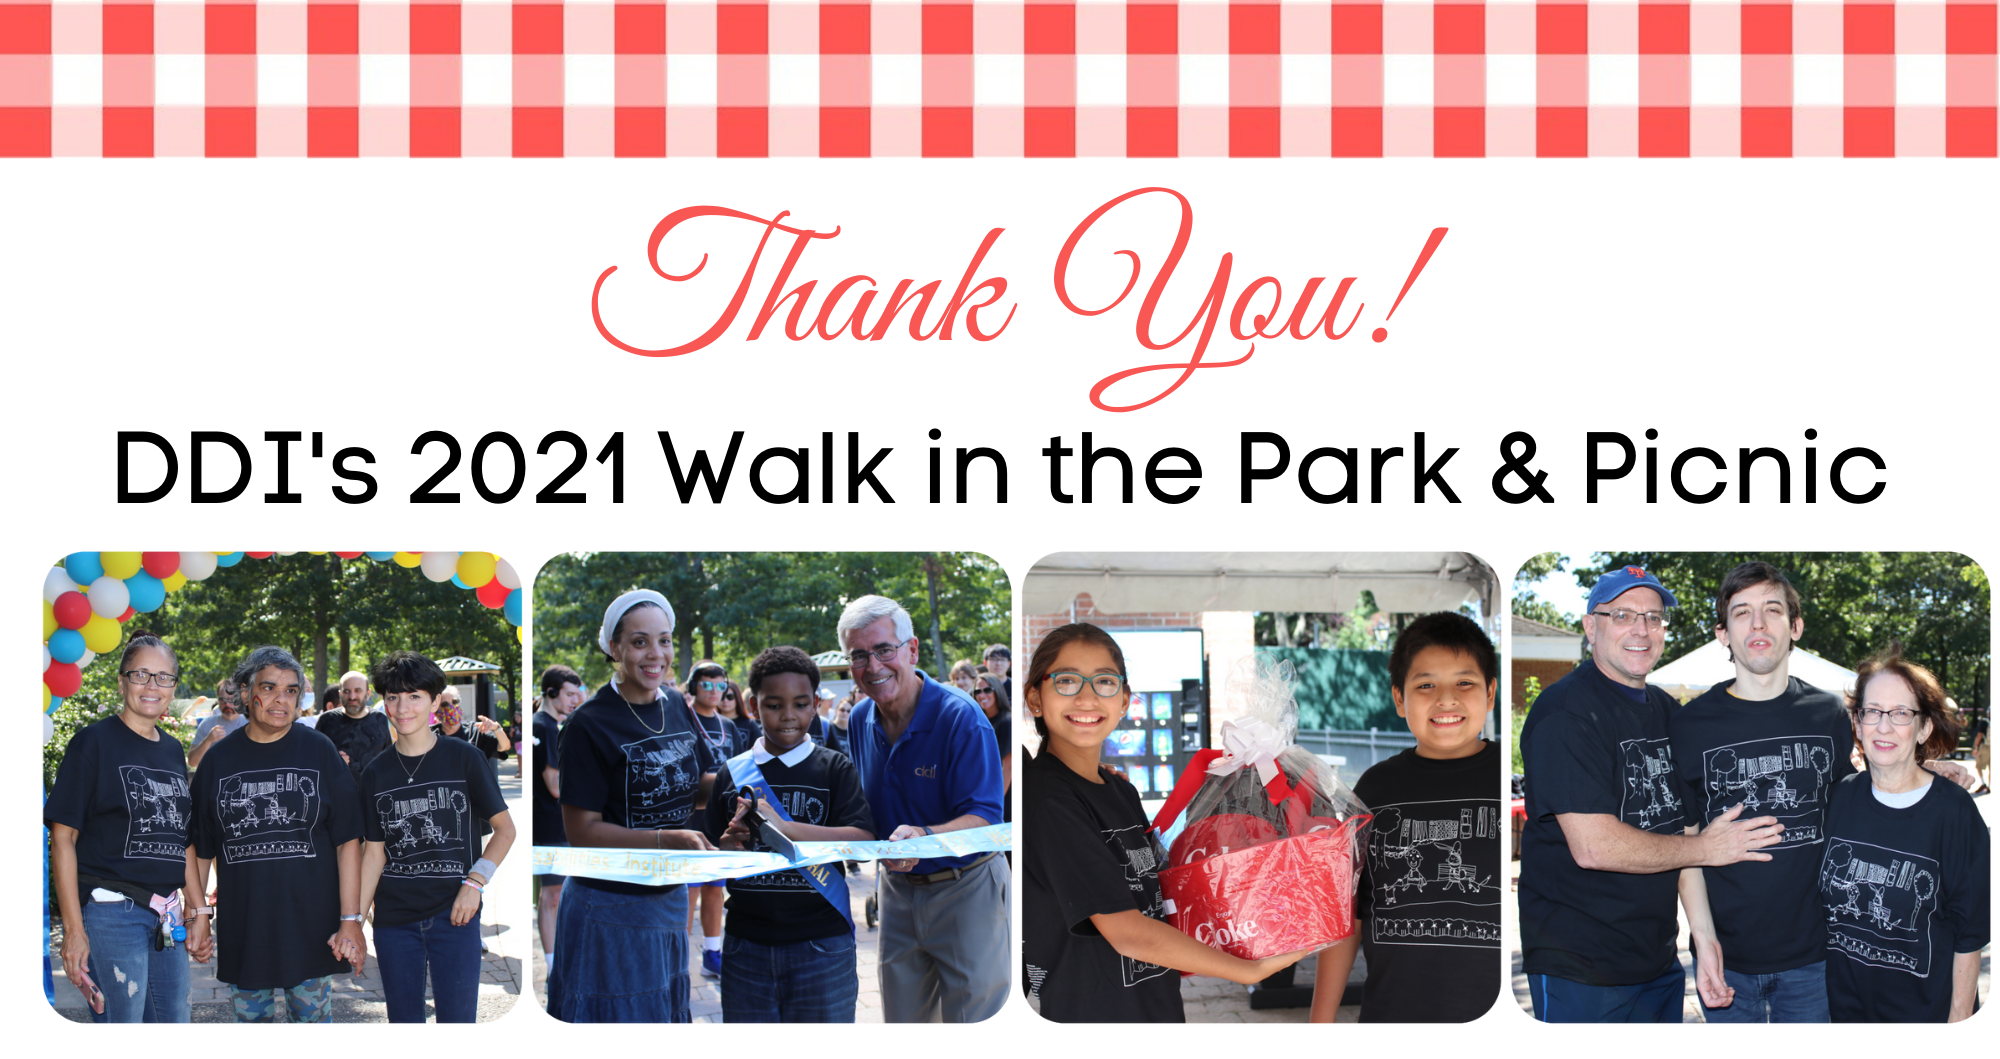 Thank you for your support at the 2021 Walk in the Park & Picnic